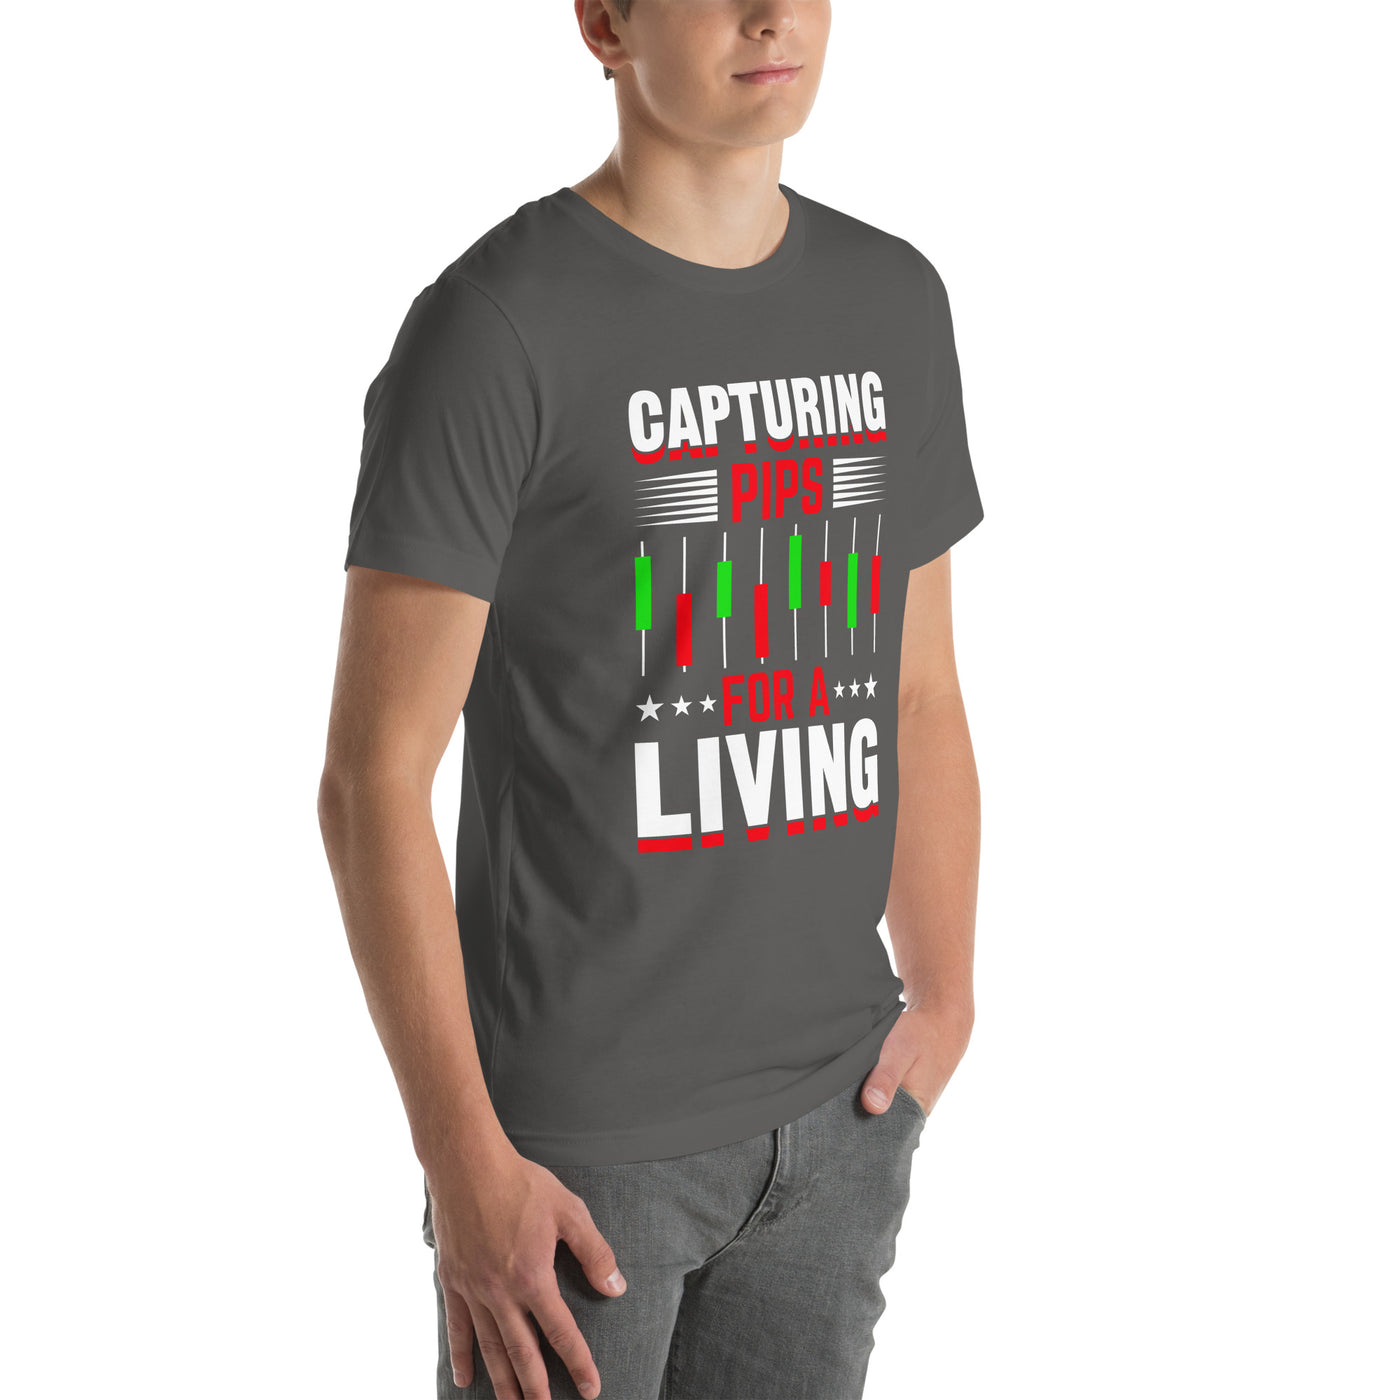 Capturing Pips for a Living - t-shirt